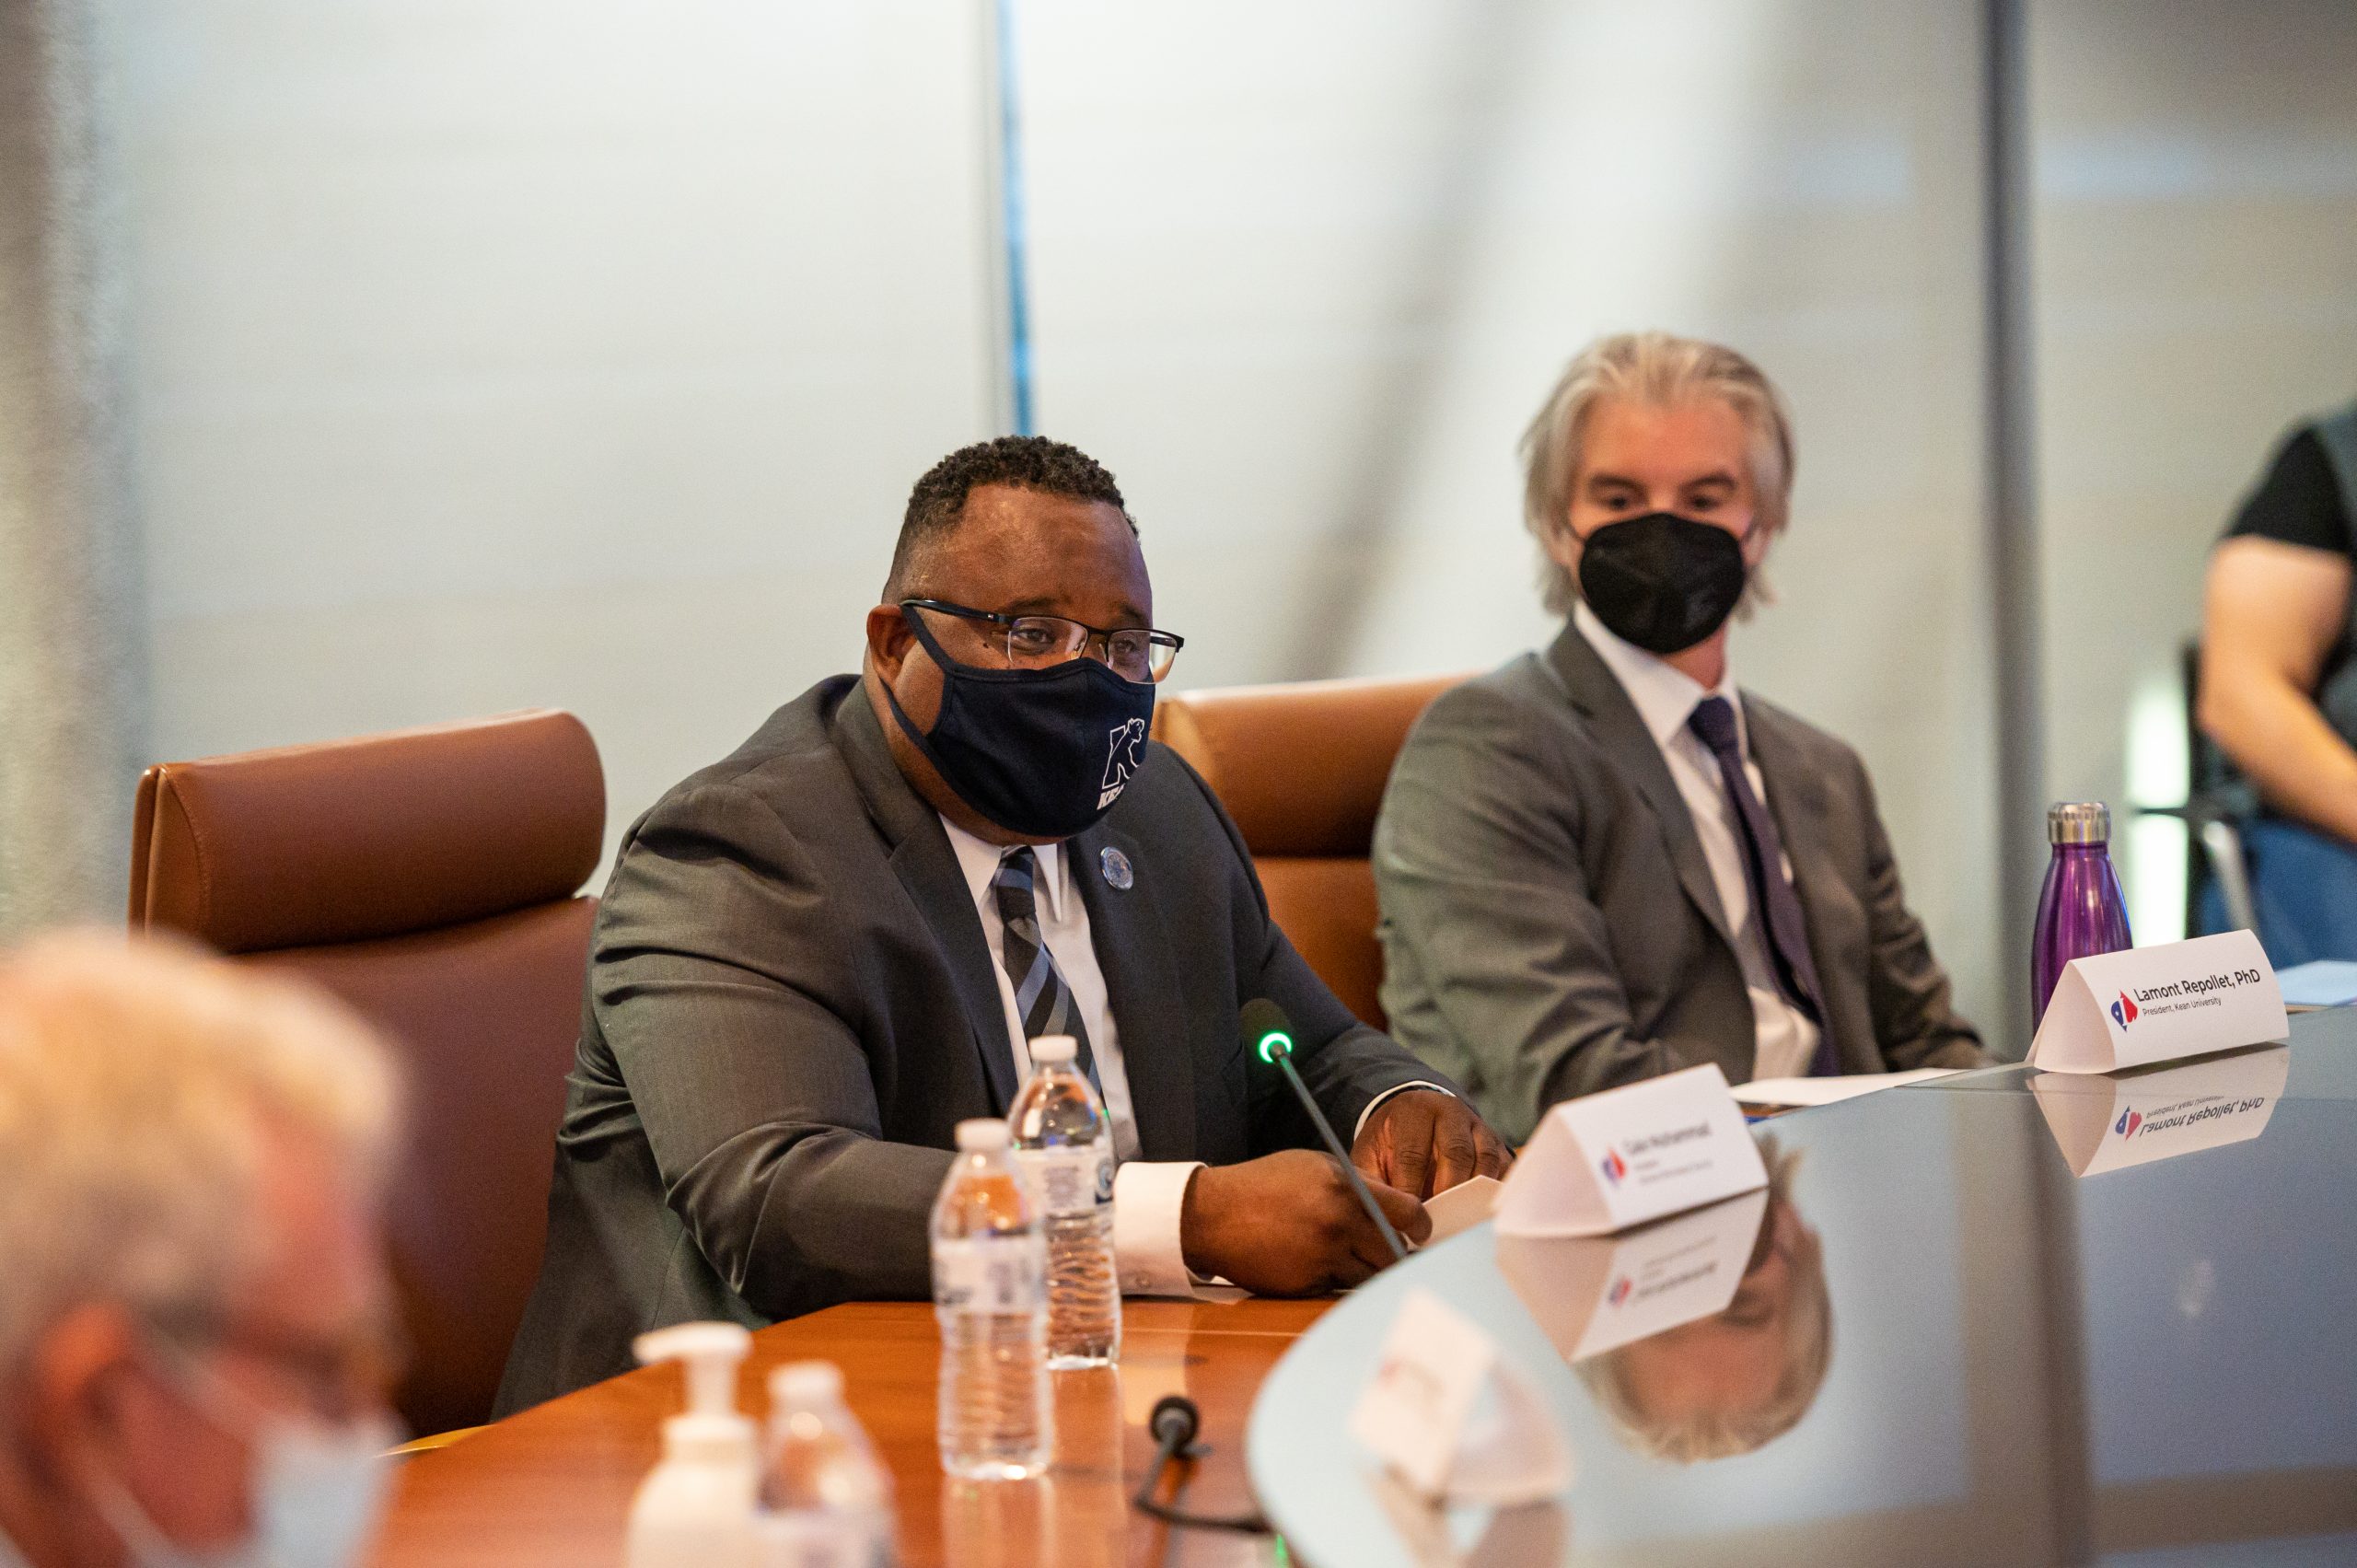 Kean President, Dr Lamont Repollet discusses Mental Health Courts at the Lesniak Institute and Kean University, Criminalization of Mental Illness Forum 